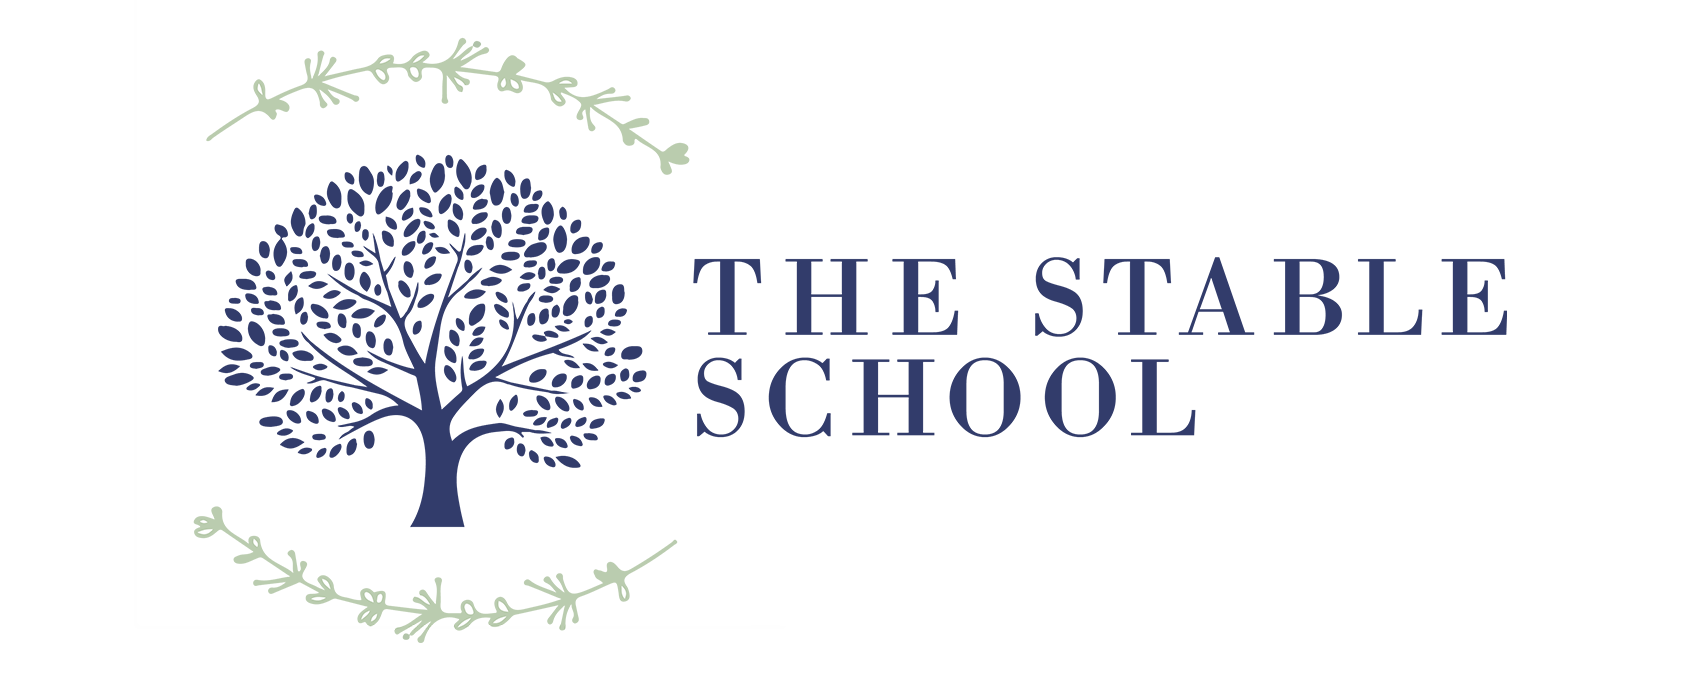 The Stable School